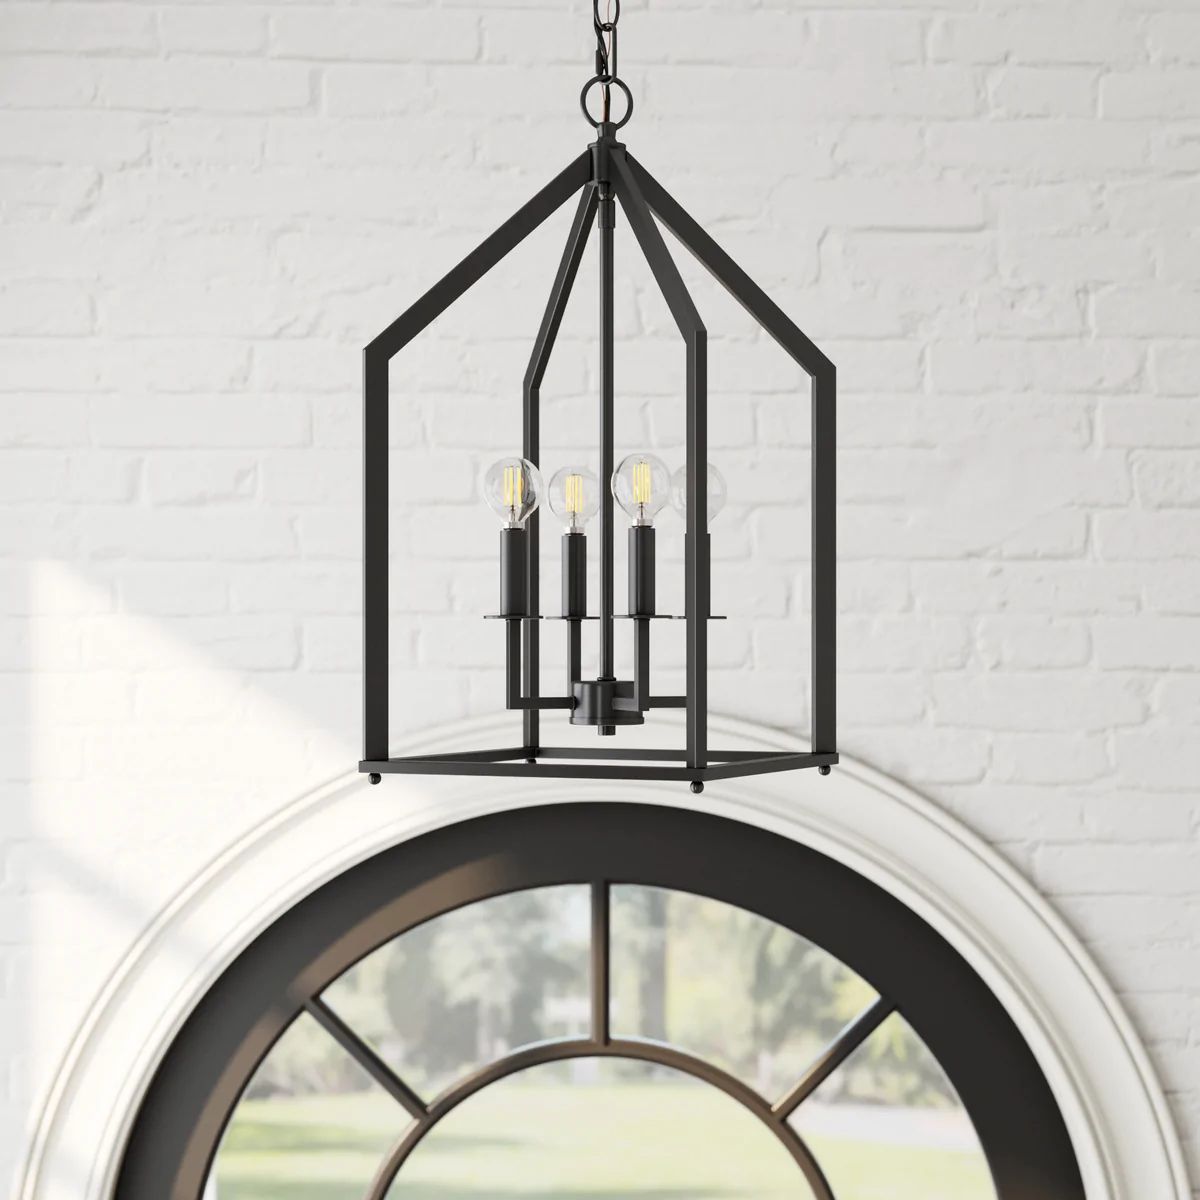 Skye Farmhouse Ceiling Chandelier Fixture | With Black Metal Cage Shade | Nathan James